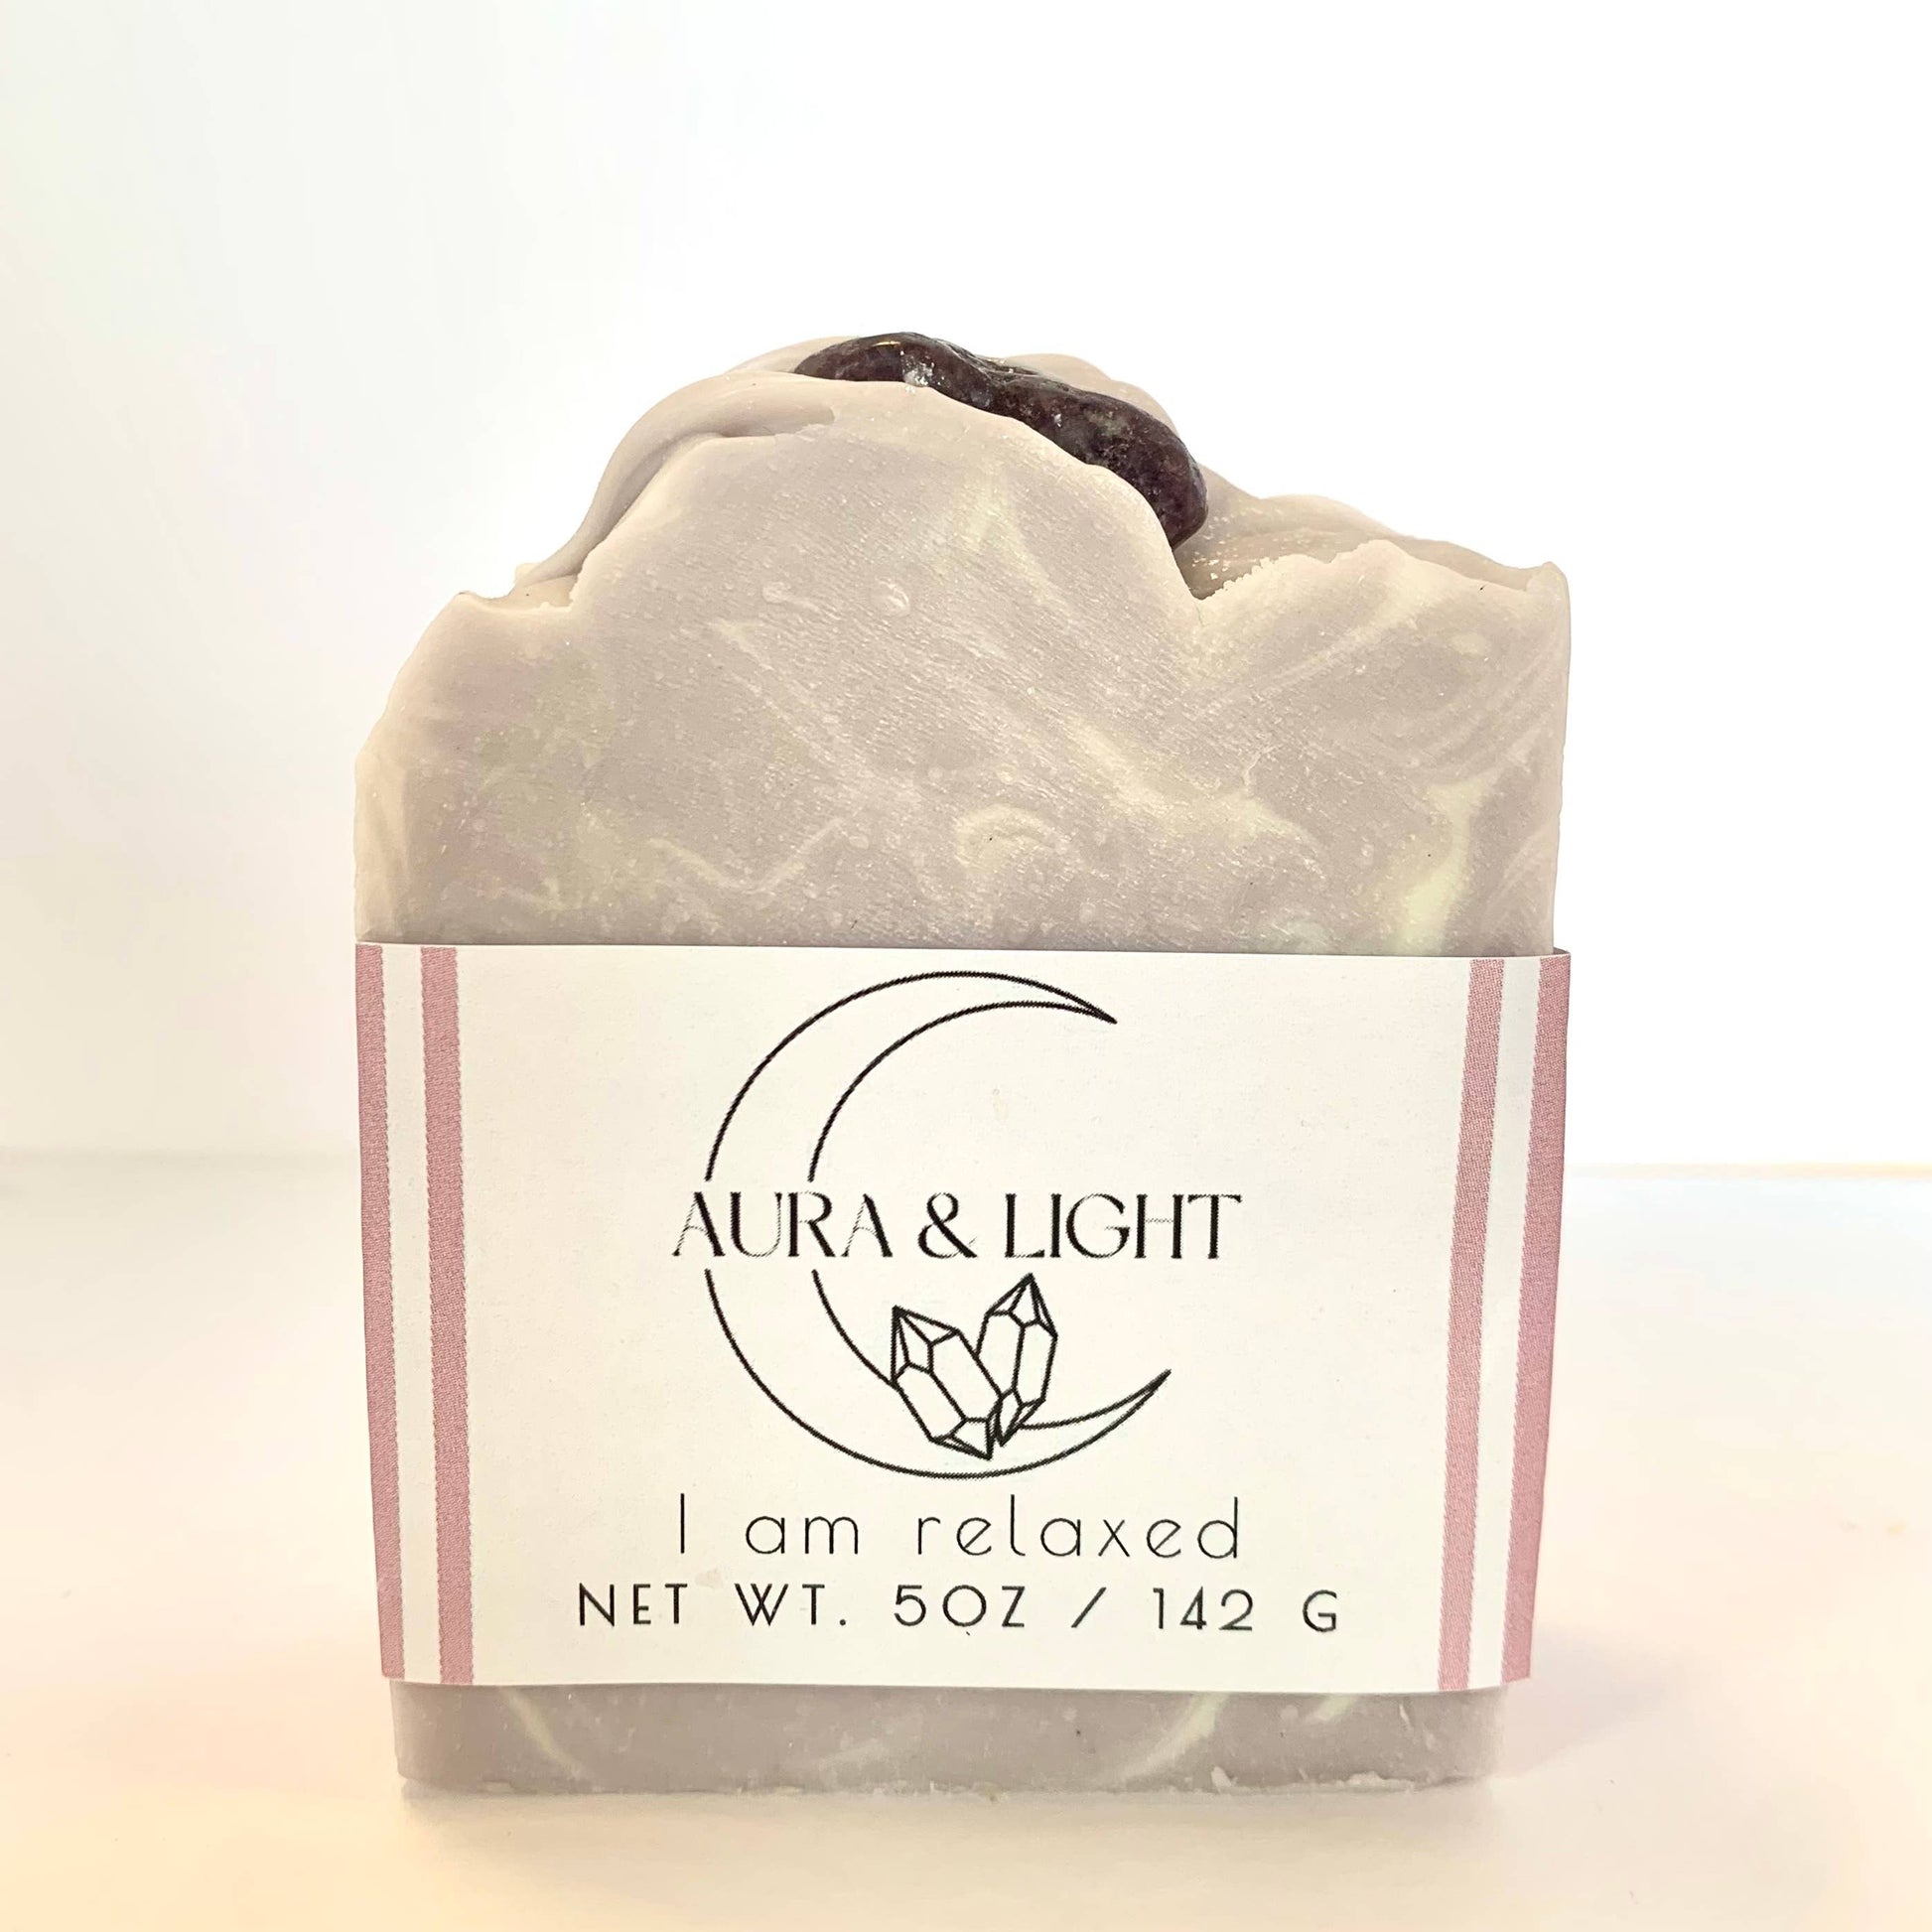 I am relaxed - Aura & Light Crystal Soap - Pluff Mud Mercantile